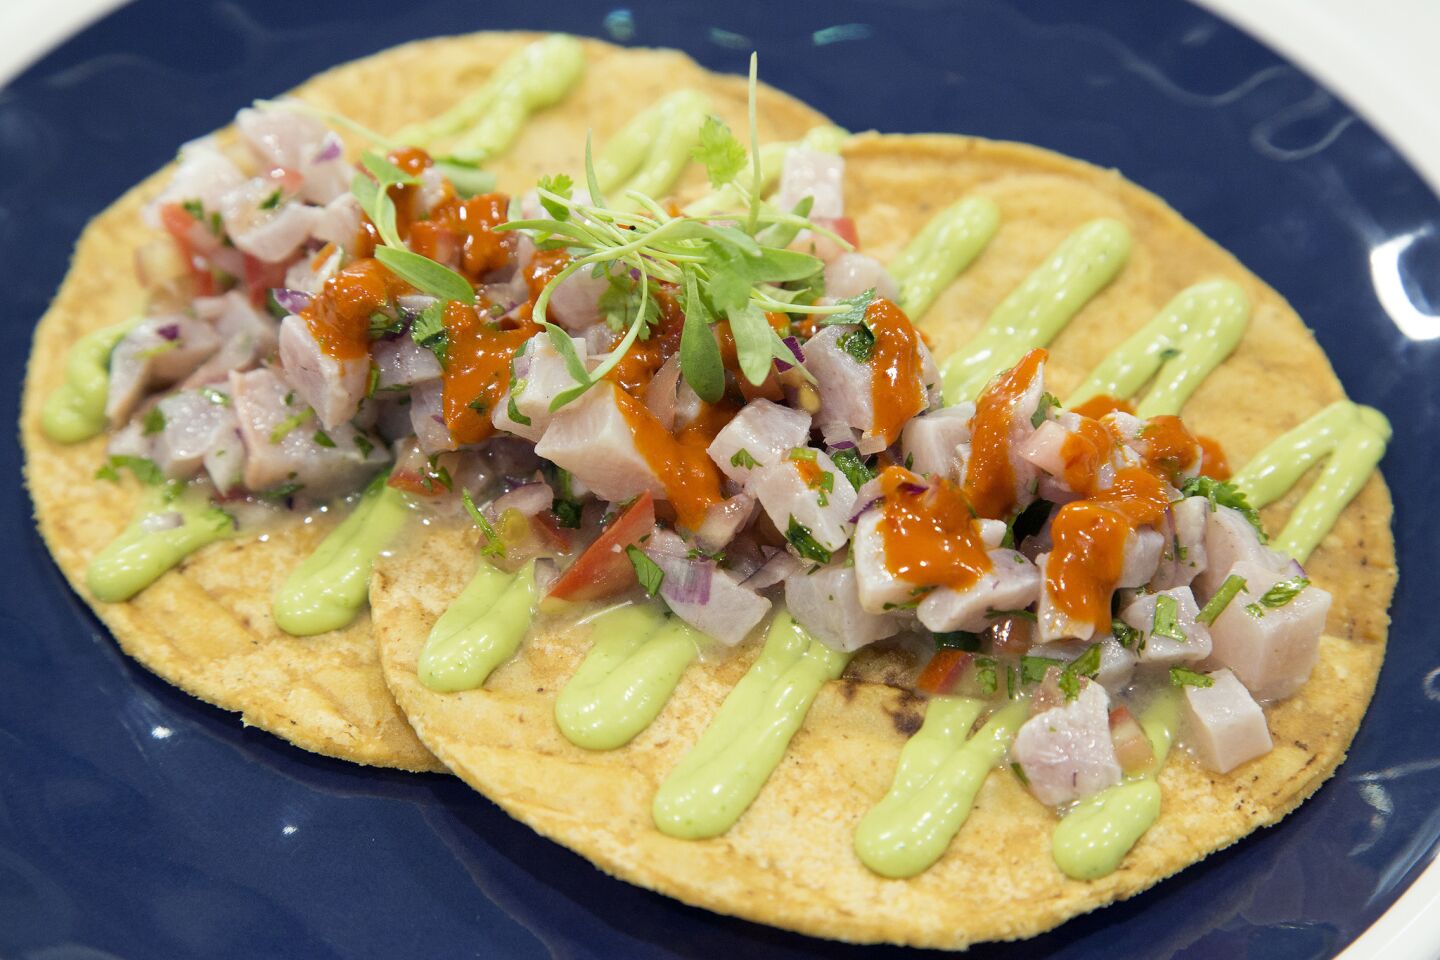 The ceviches on offer may include this one made of opah.